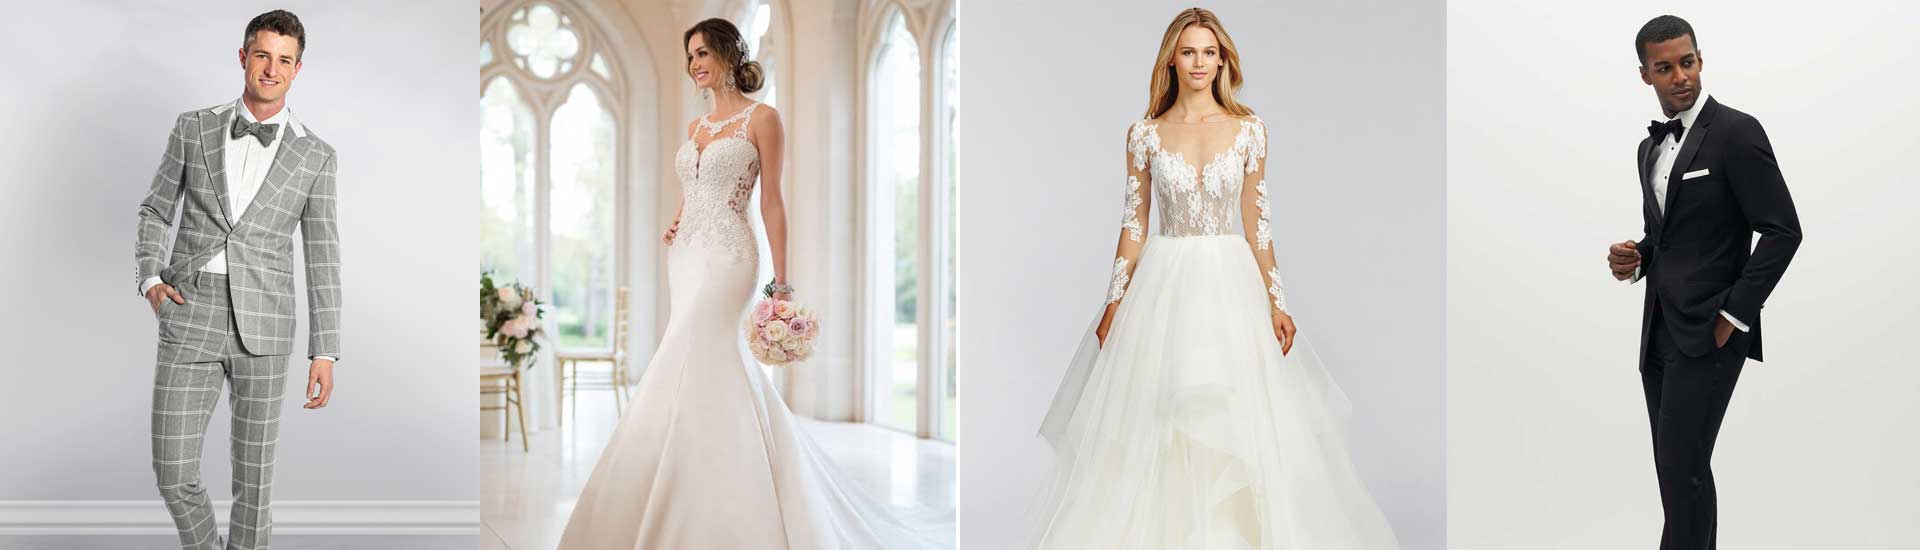 WEDDING-DRESS-STYLE-FOR-BODY-TYPES